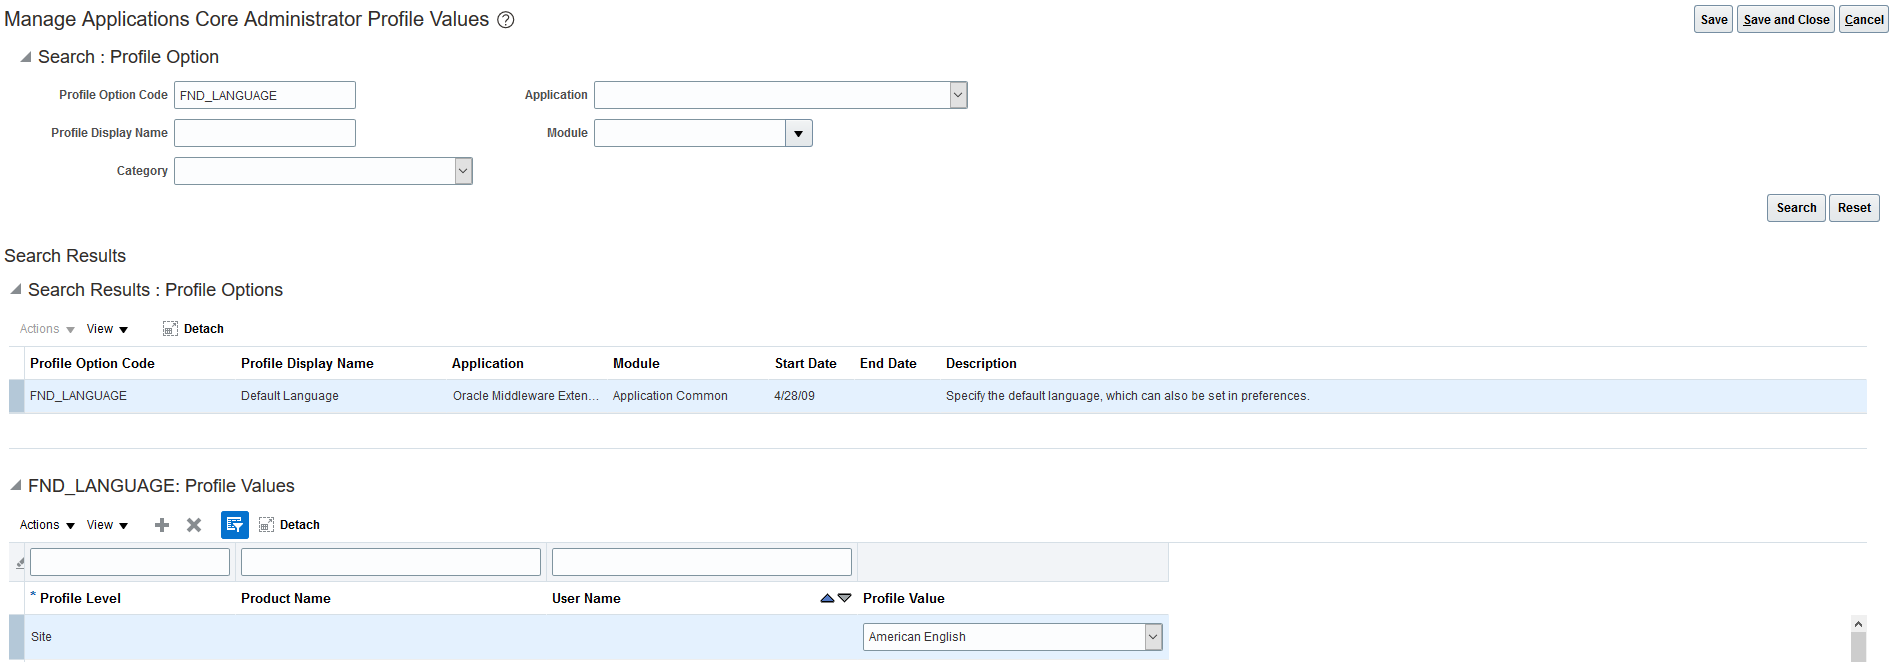 Example of the Manage Applications Core Administrator Profile Values page